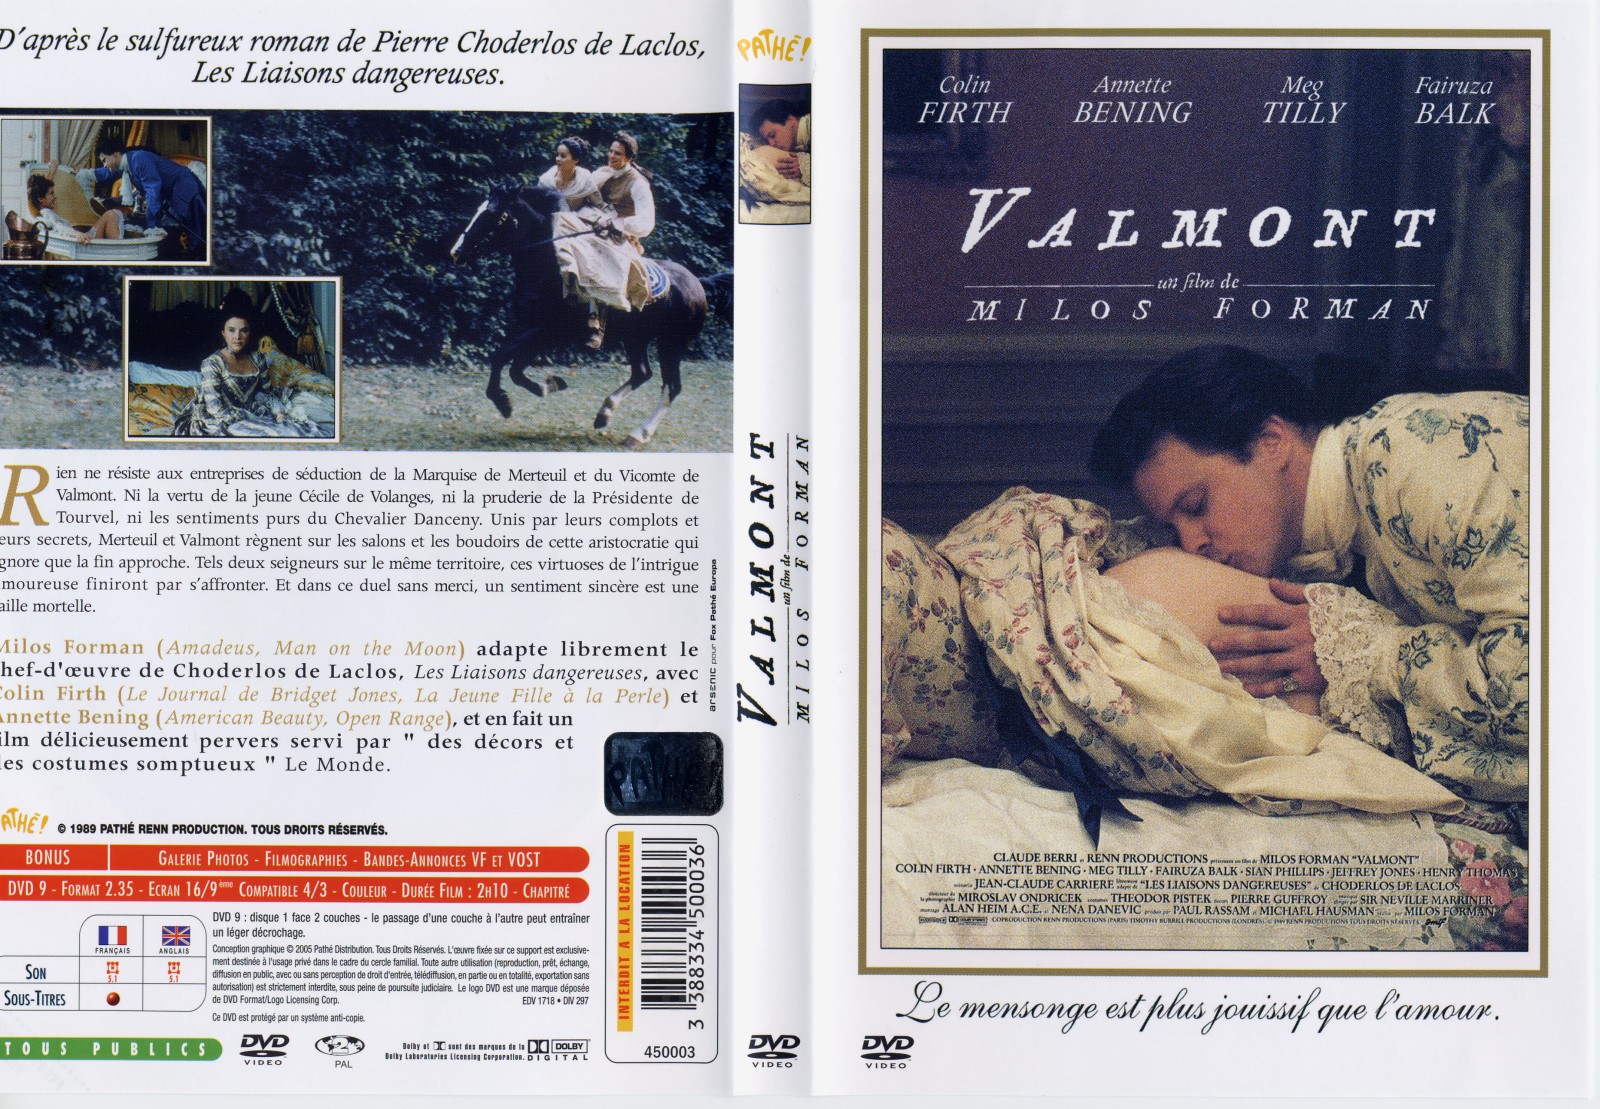 Jaquette DVD Valmont